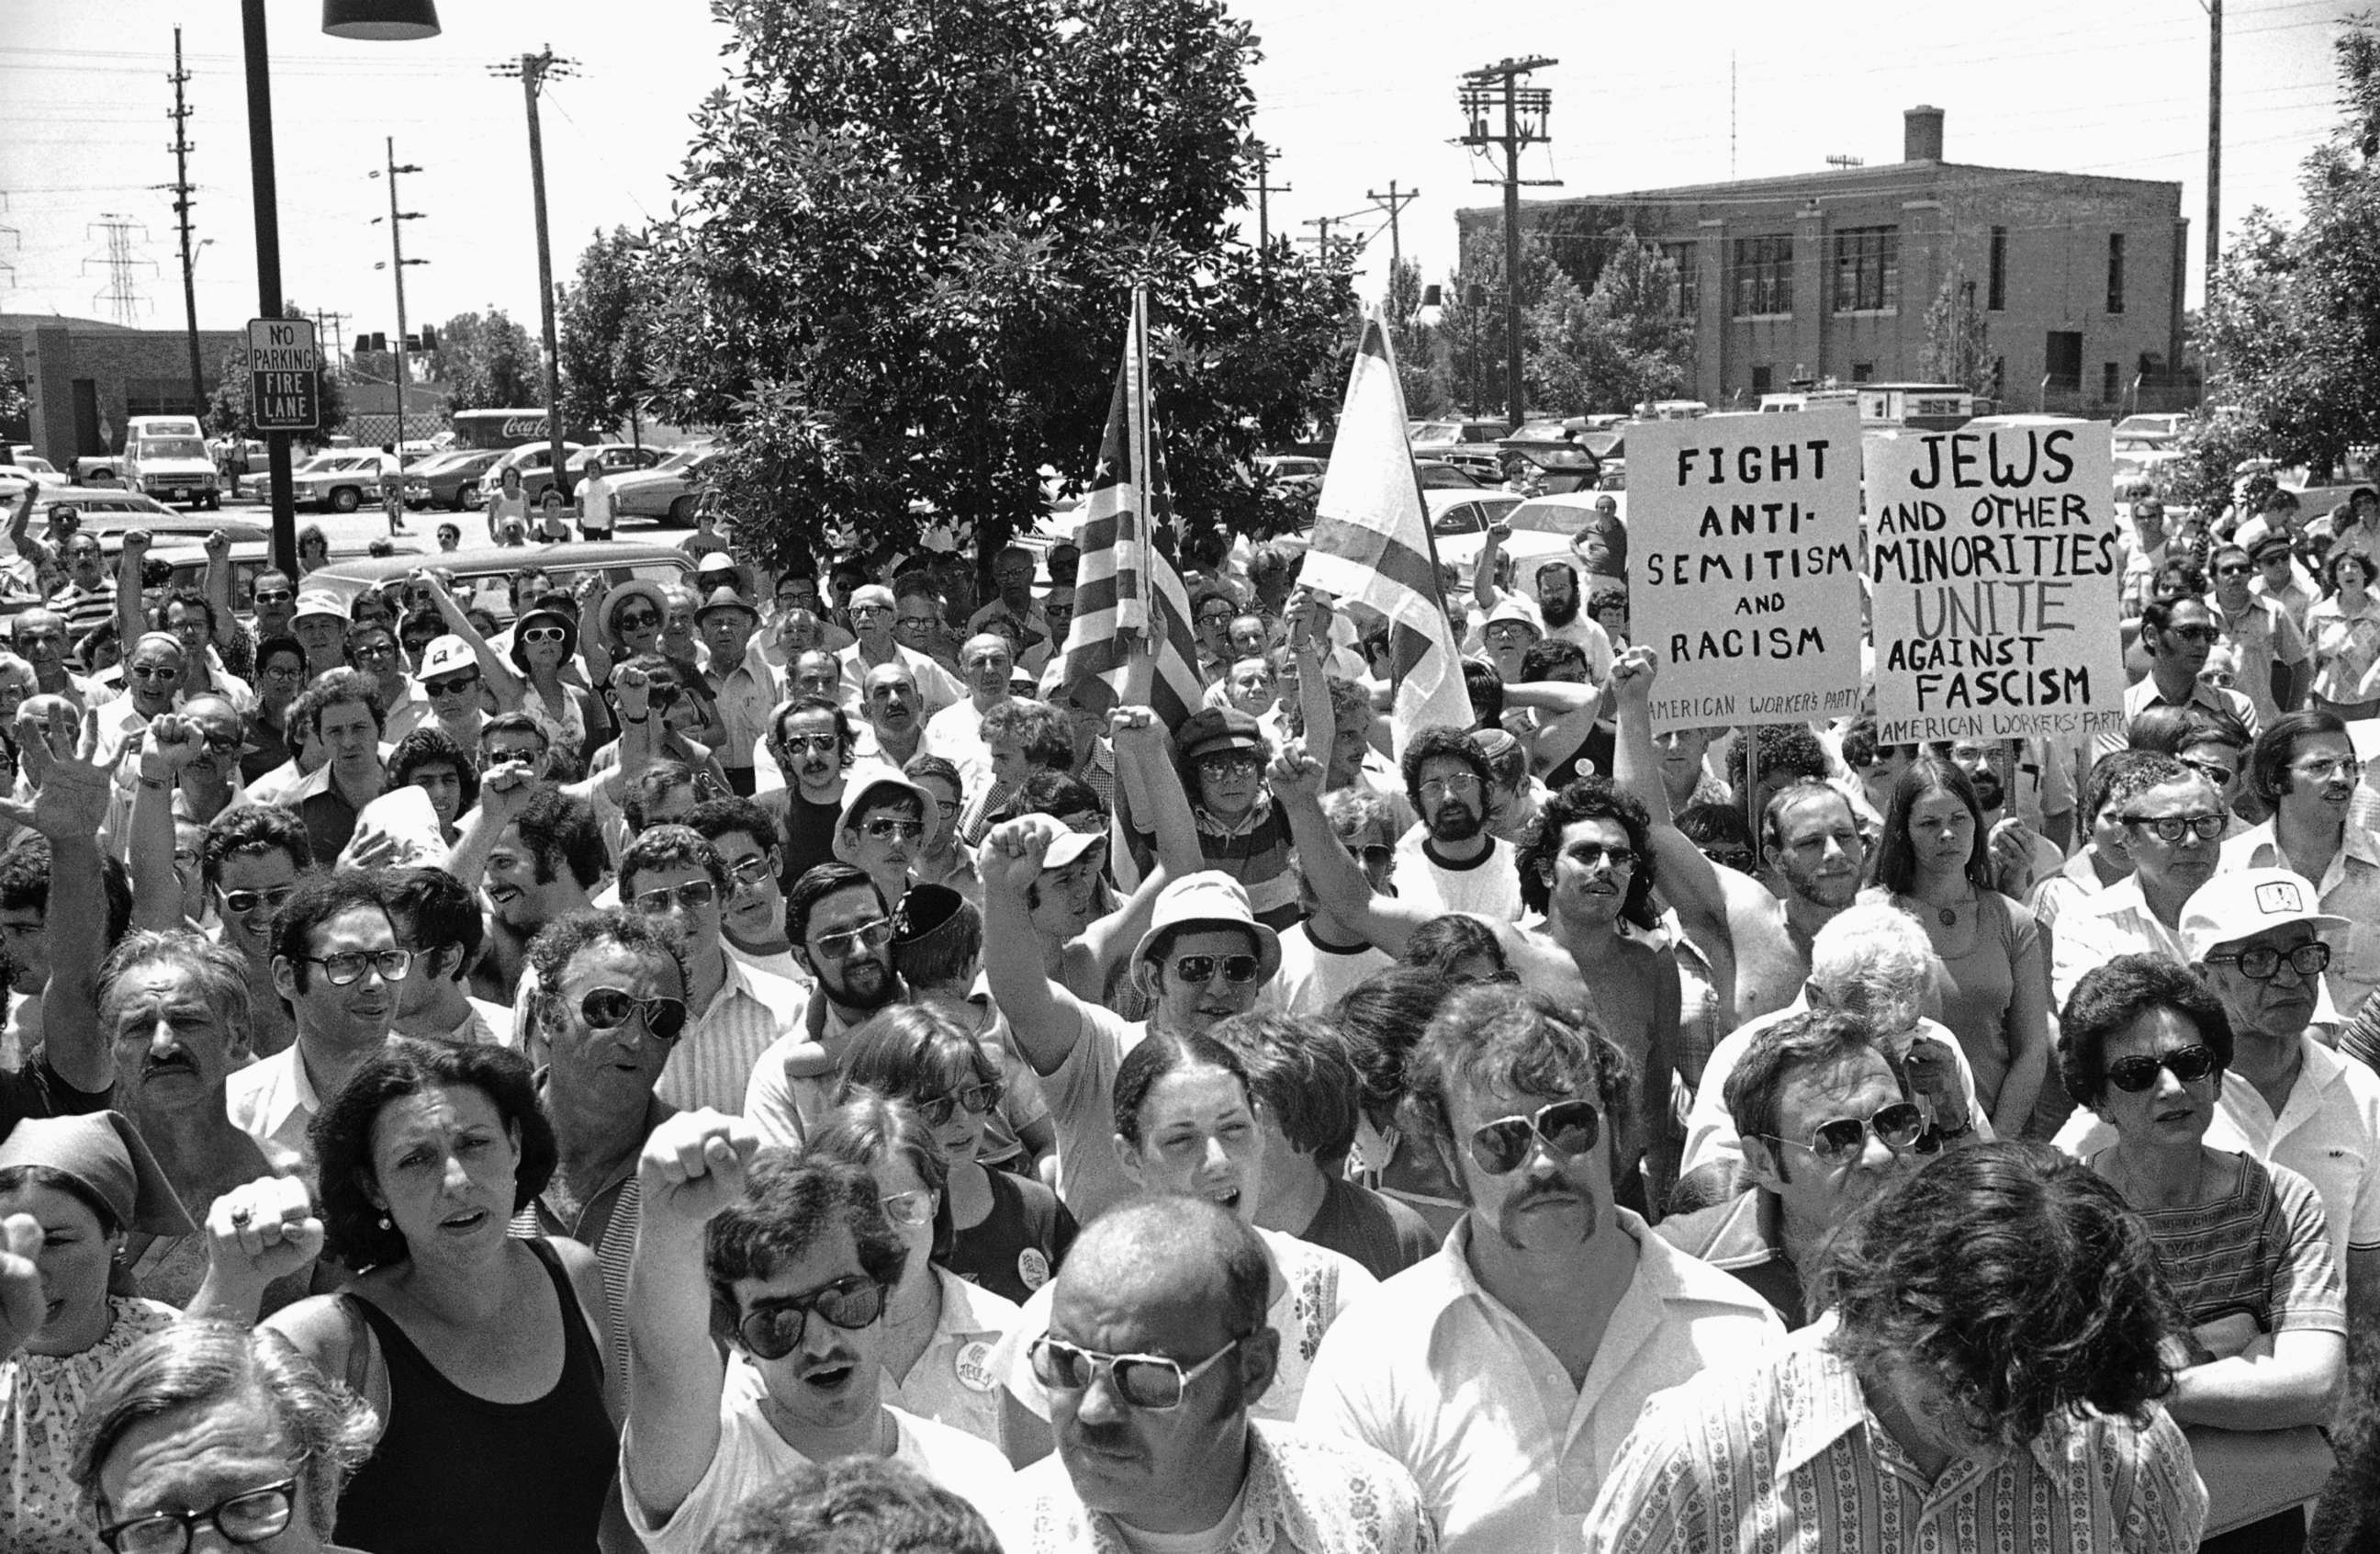 PHOTO: A large group of anti-Nazi demonstrators chant at a park in the predominantly Jewish Chicago suburb of Skokie, Illinois, July 4, 1977, protesting a possible future march in Skokie by Nazis.